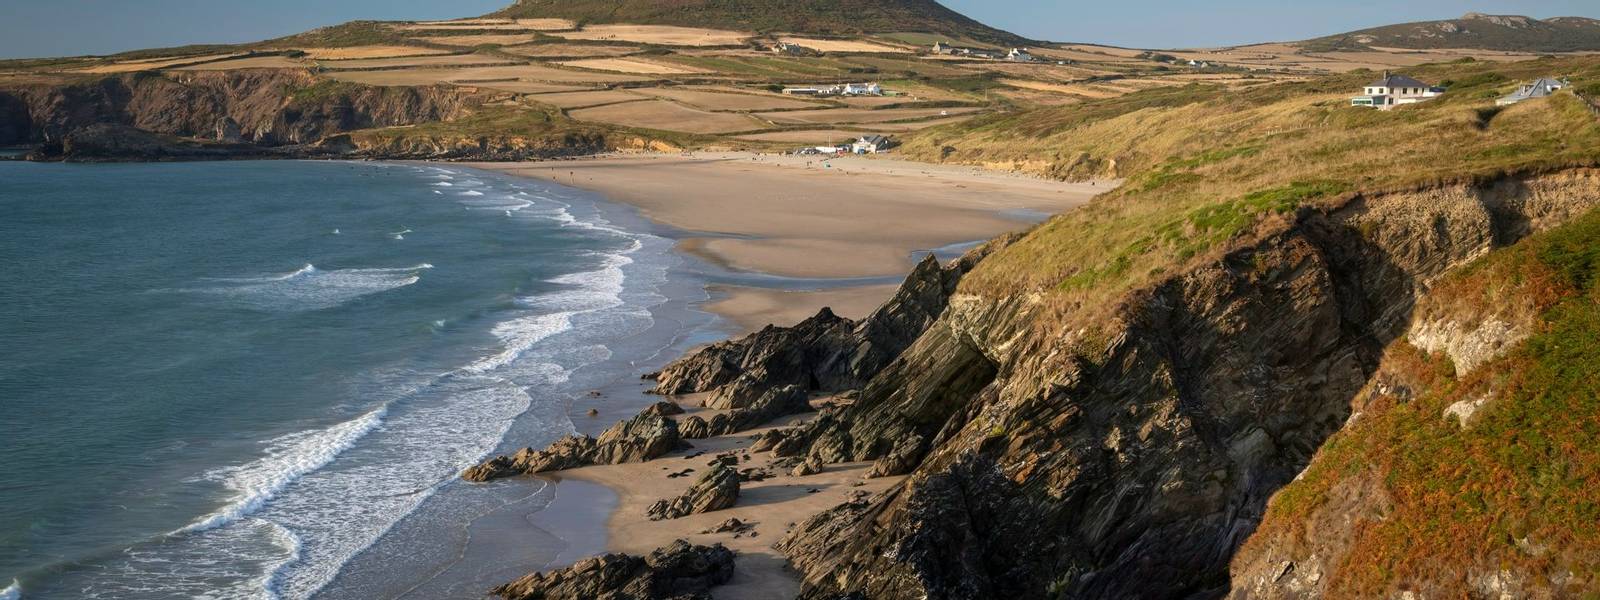 Whitesands Bay and Carn Llidi hill near St David's City in West Wales, a surfing destination with a shop and cafe.